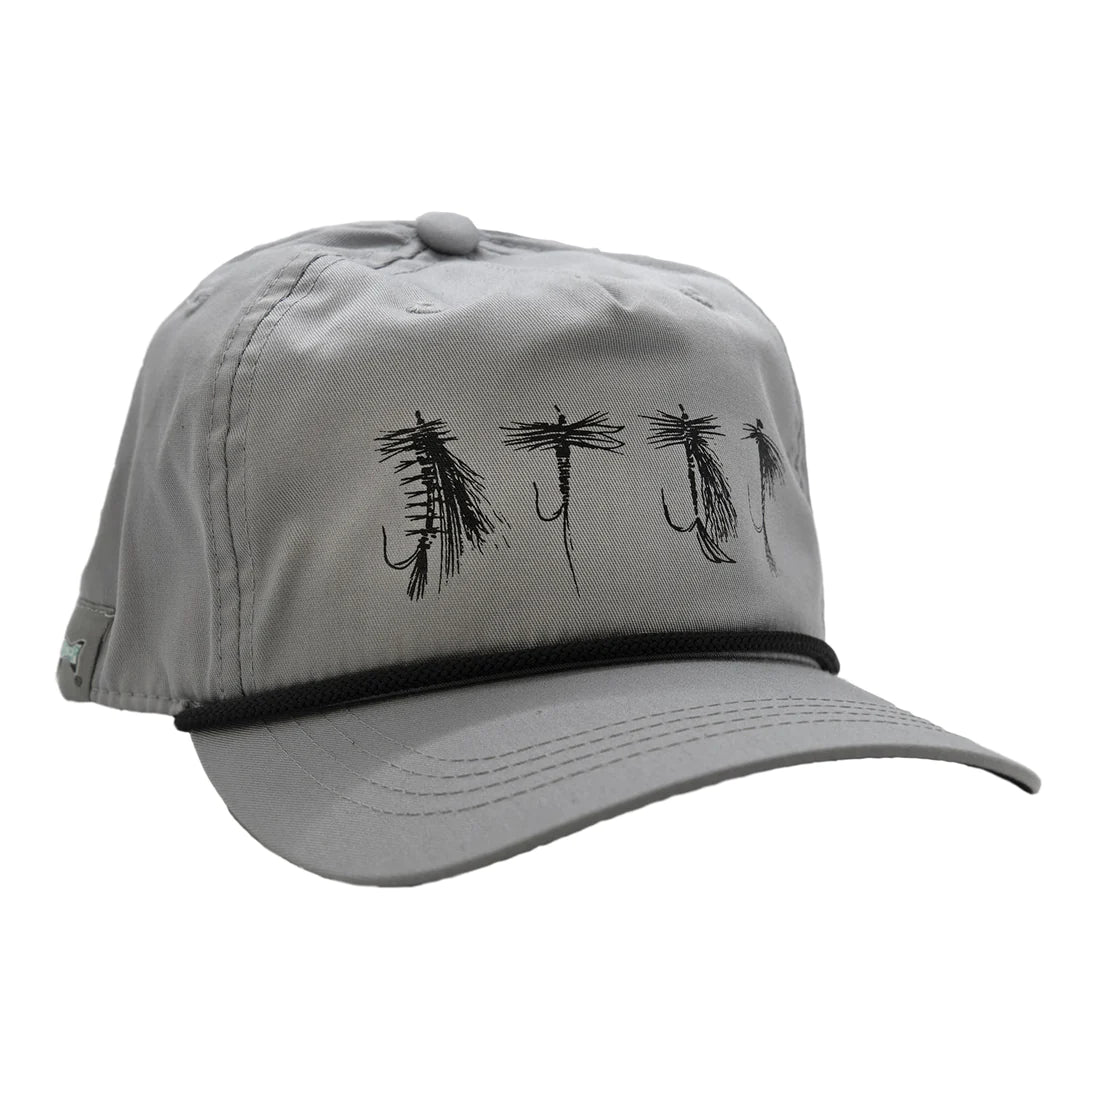 REP YOUR WATER TROUT TIES HAT